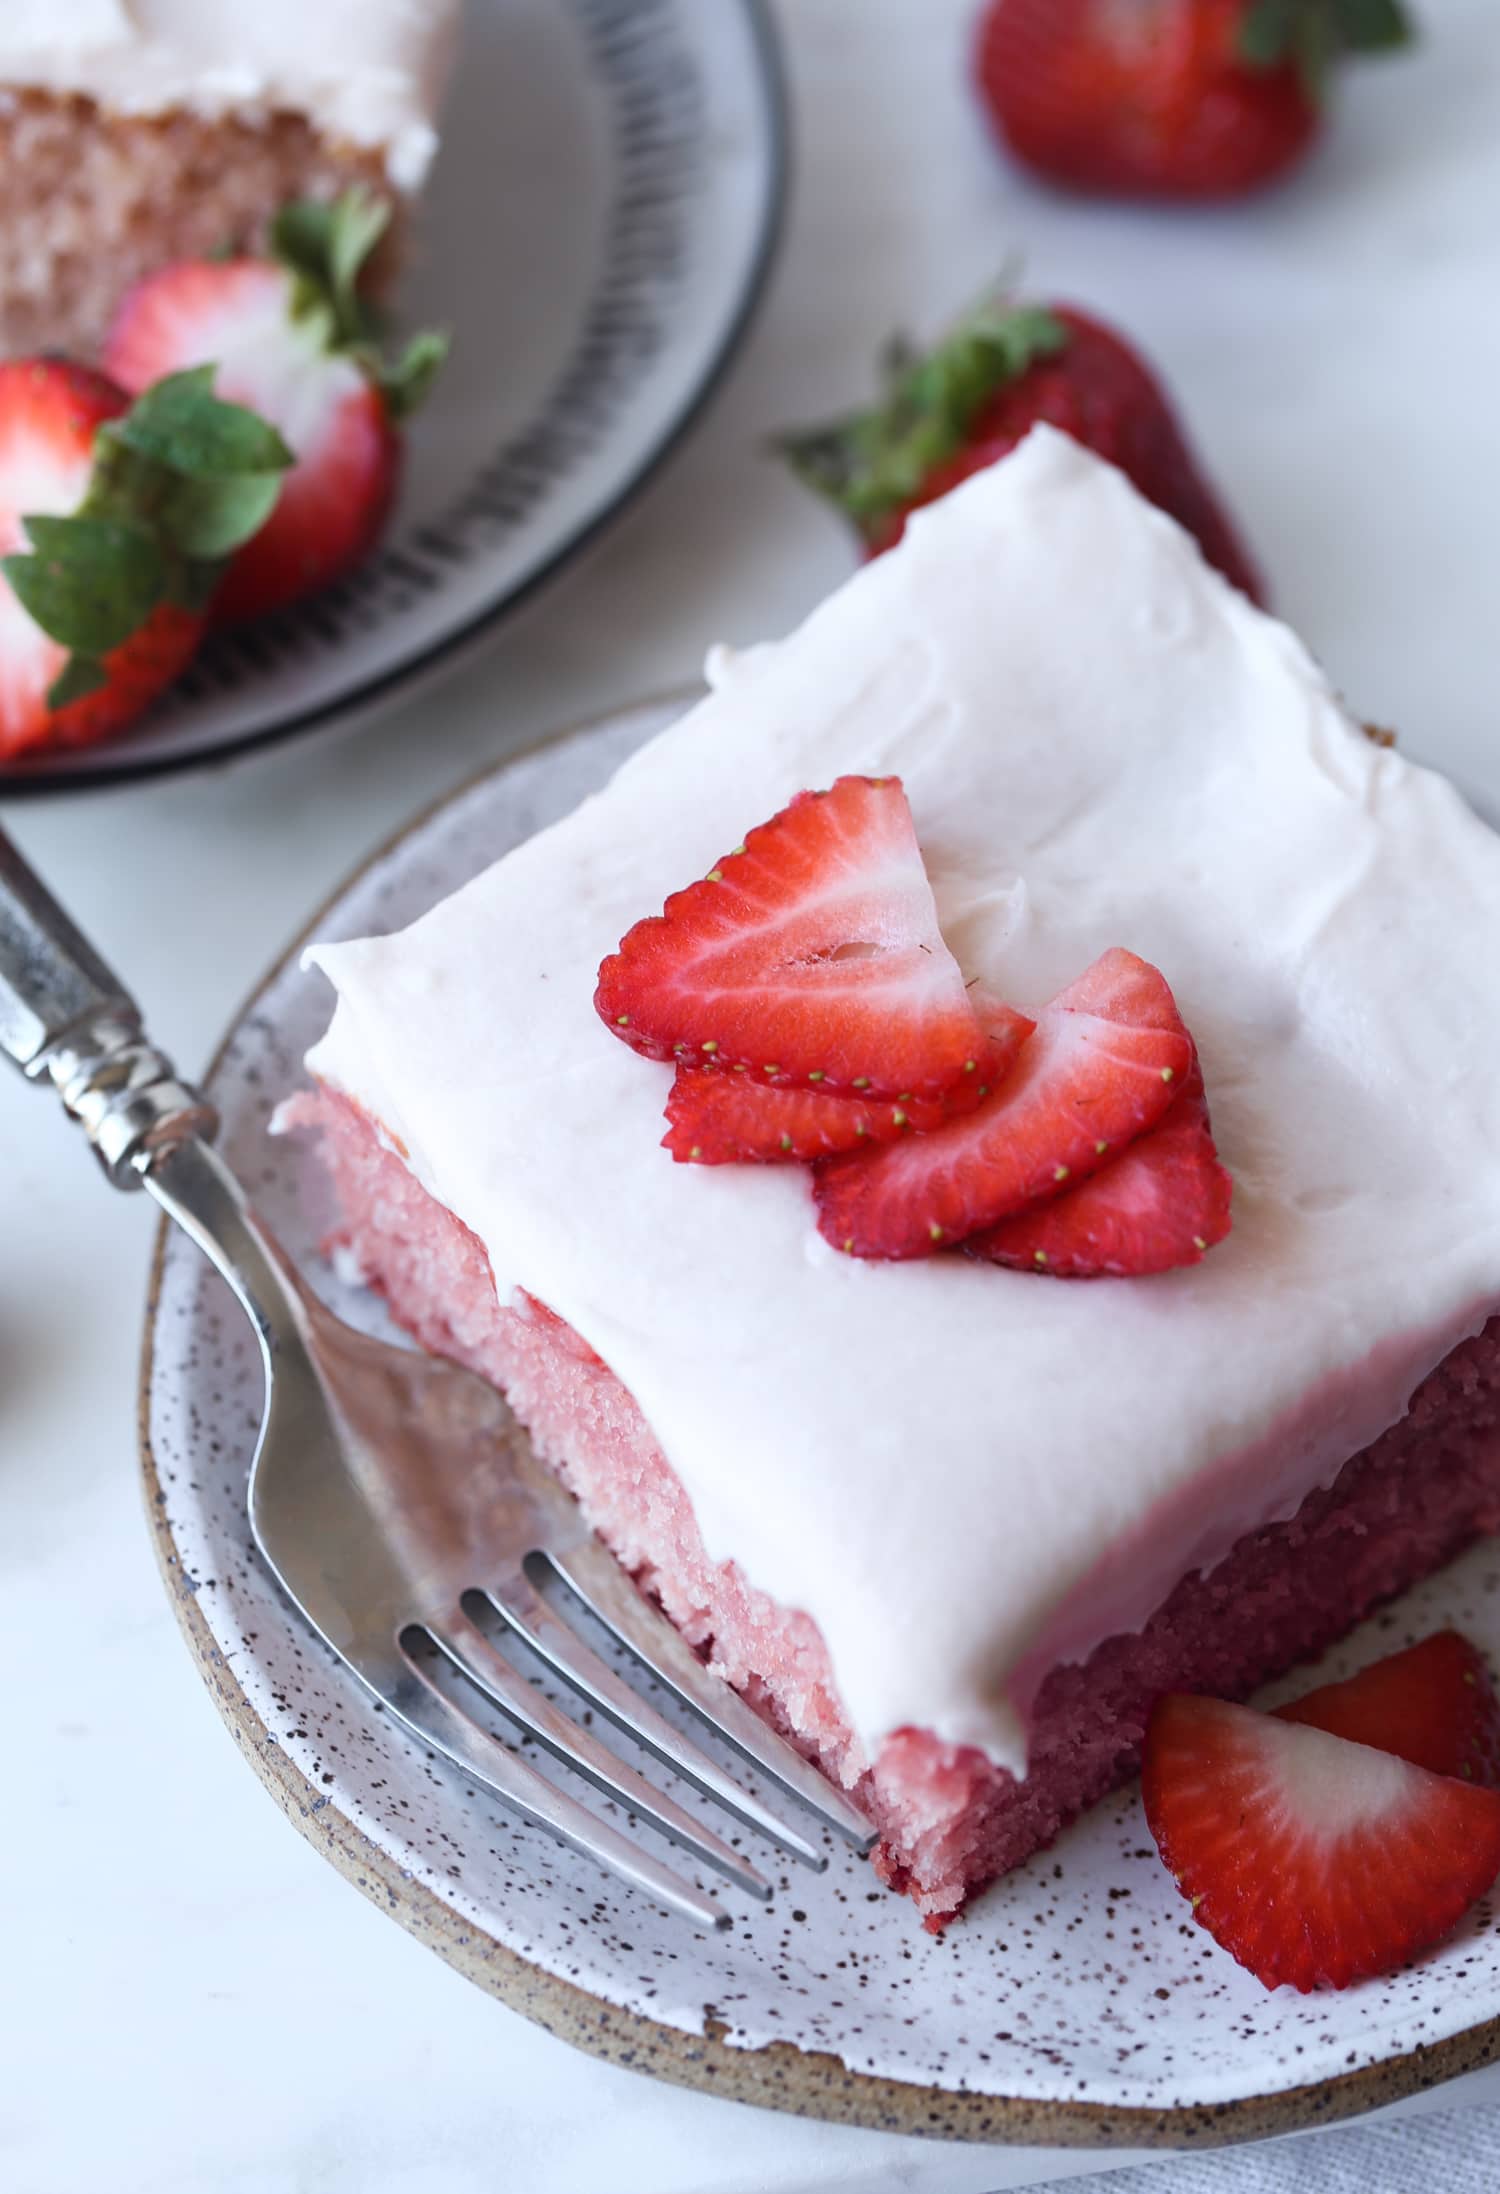 a piece of strawberry cake on a plate from above with fresh strawberry slices